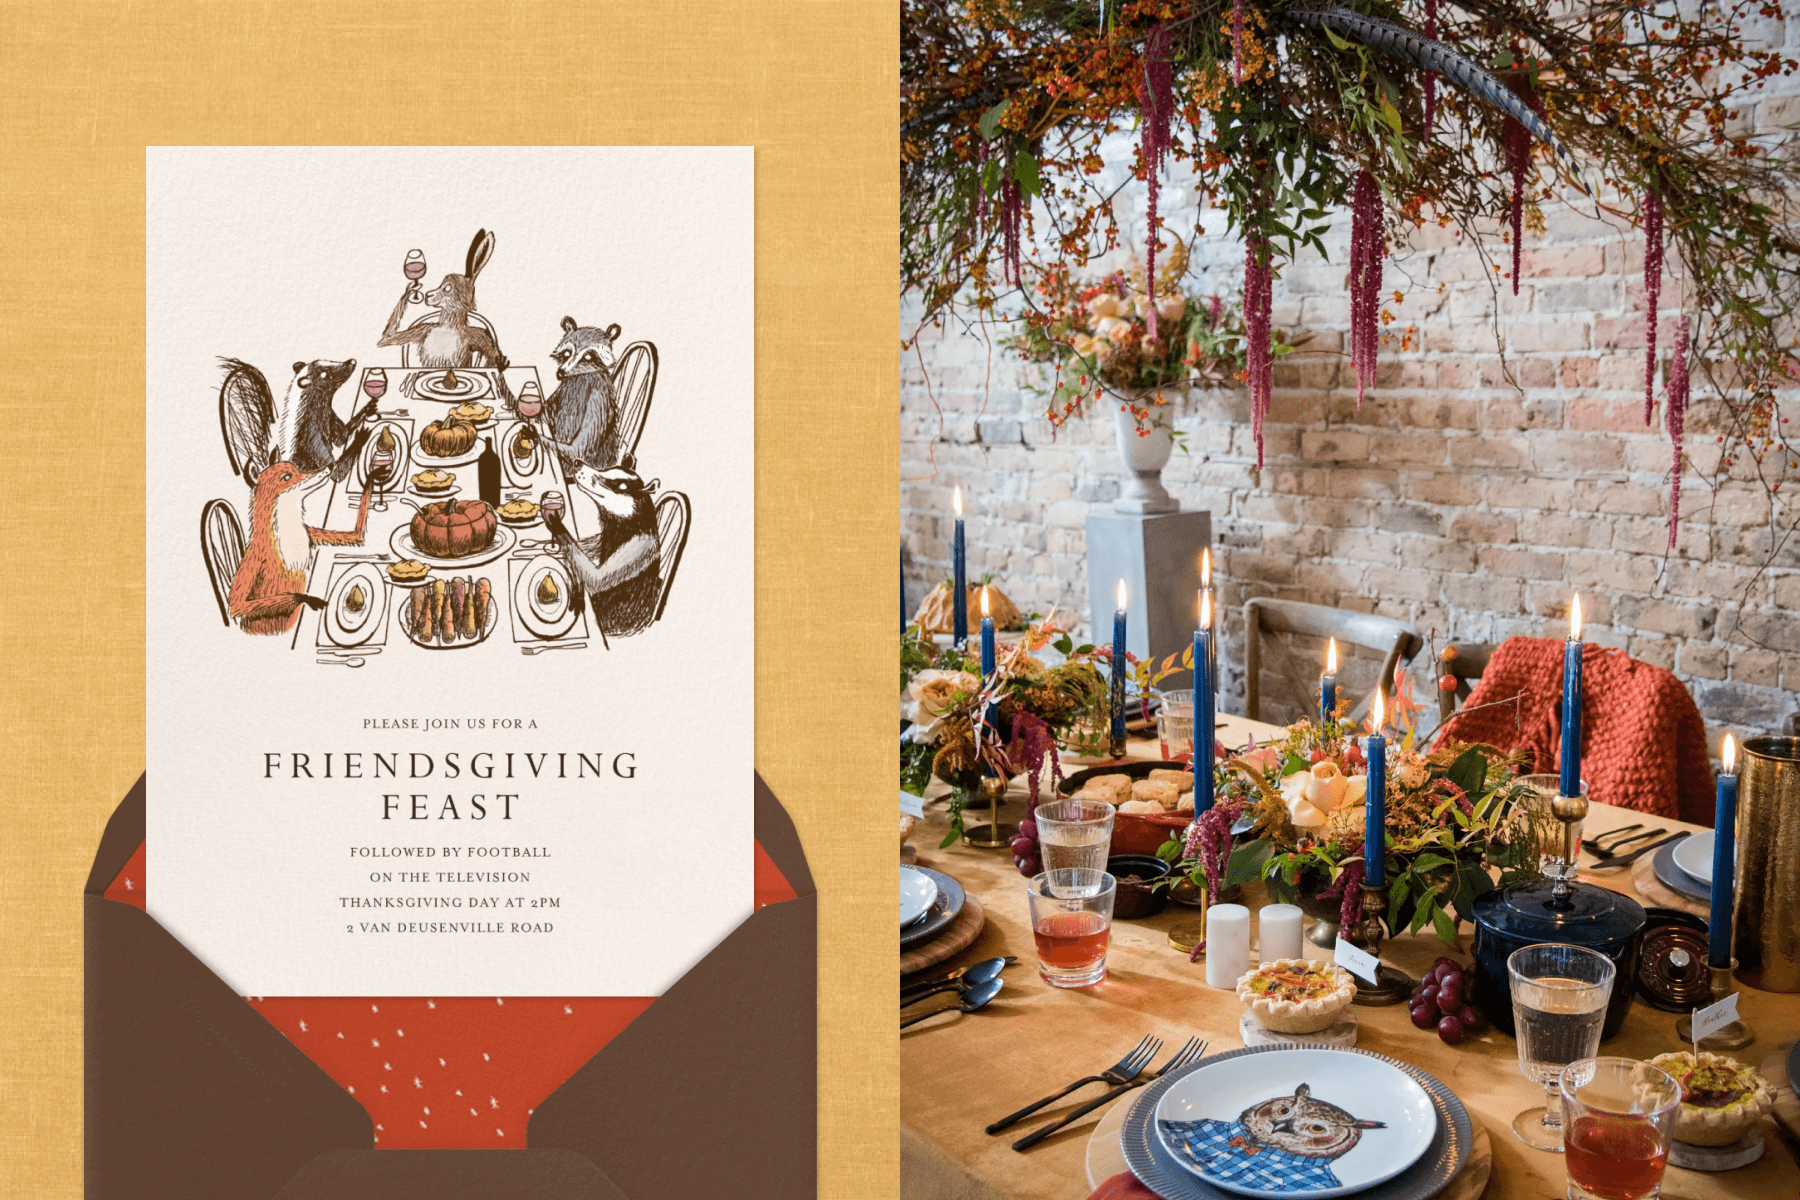 Left: An invitation with forest animals enjoying a Thanksgiving meal. Right: A table set with blue taper candles, fall flowers, an owl dish, and a floral arrangement above.